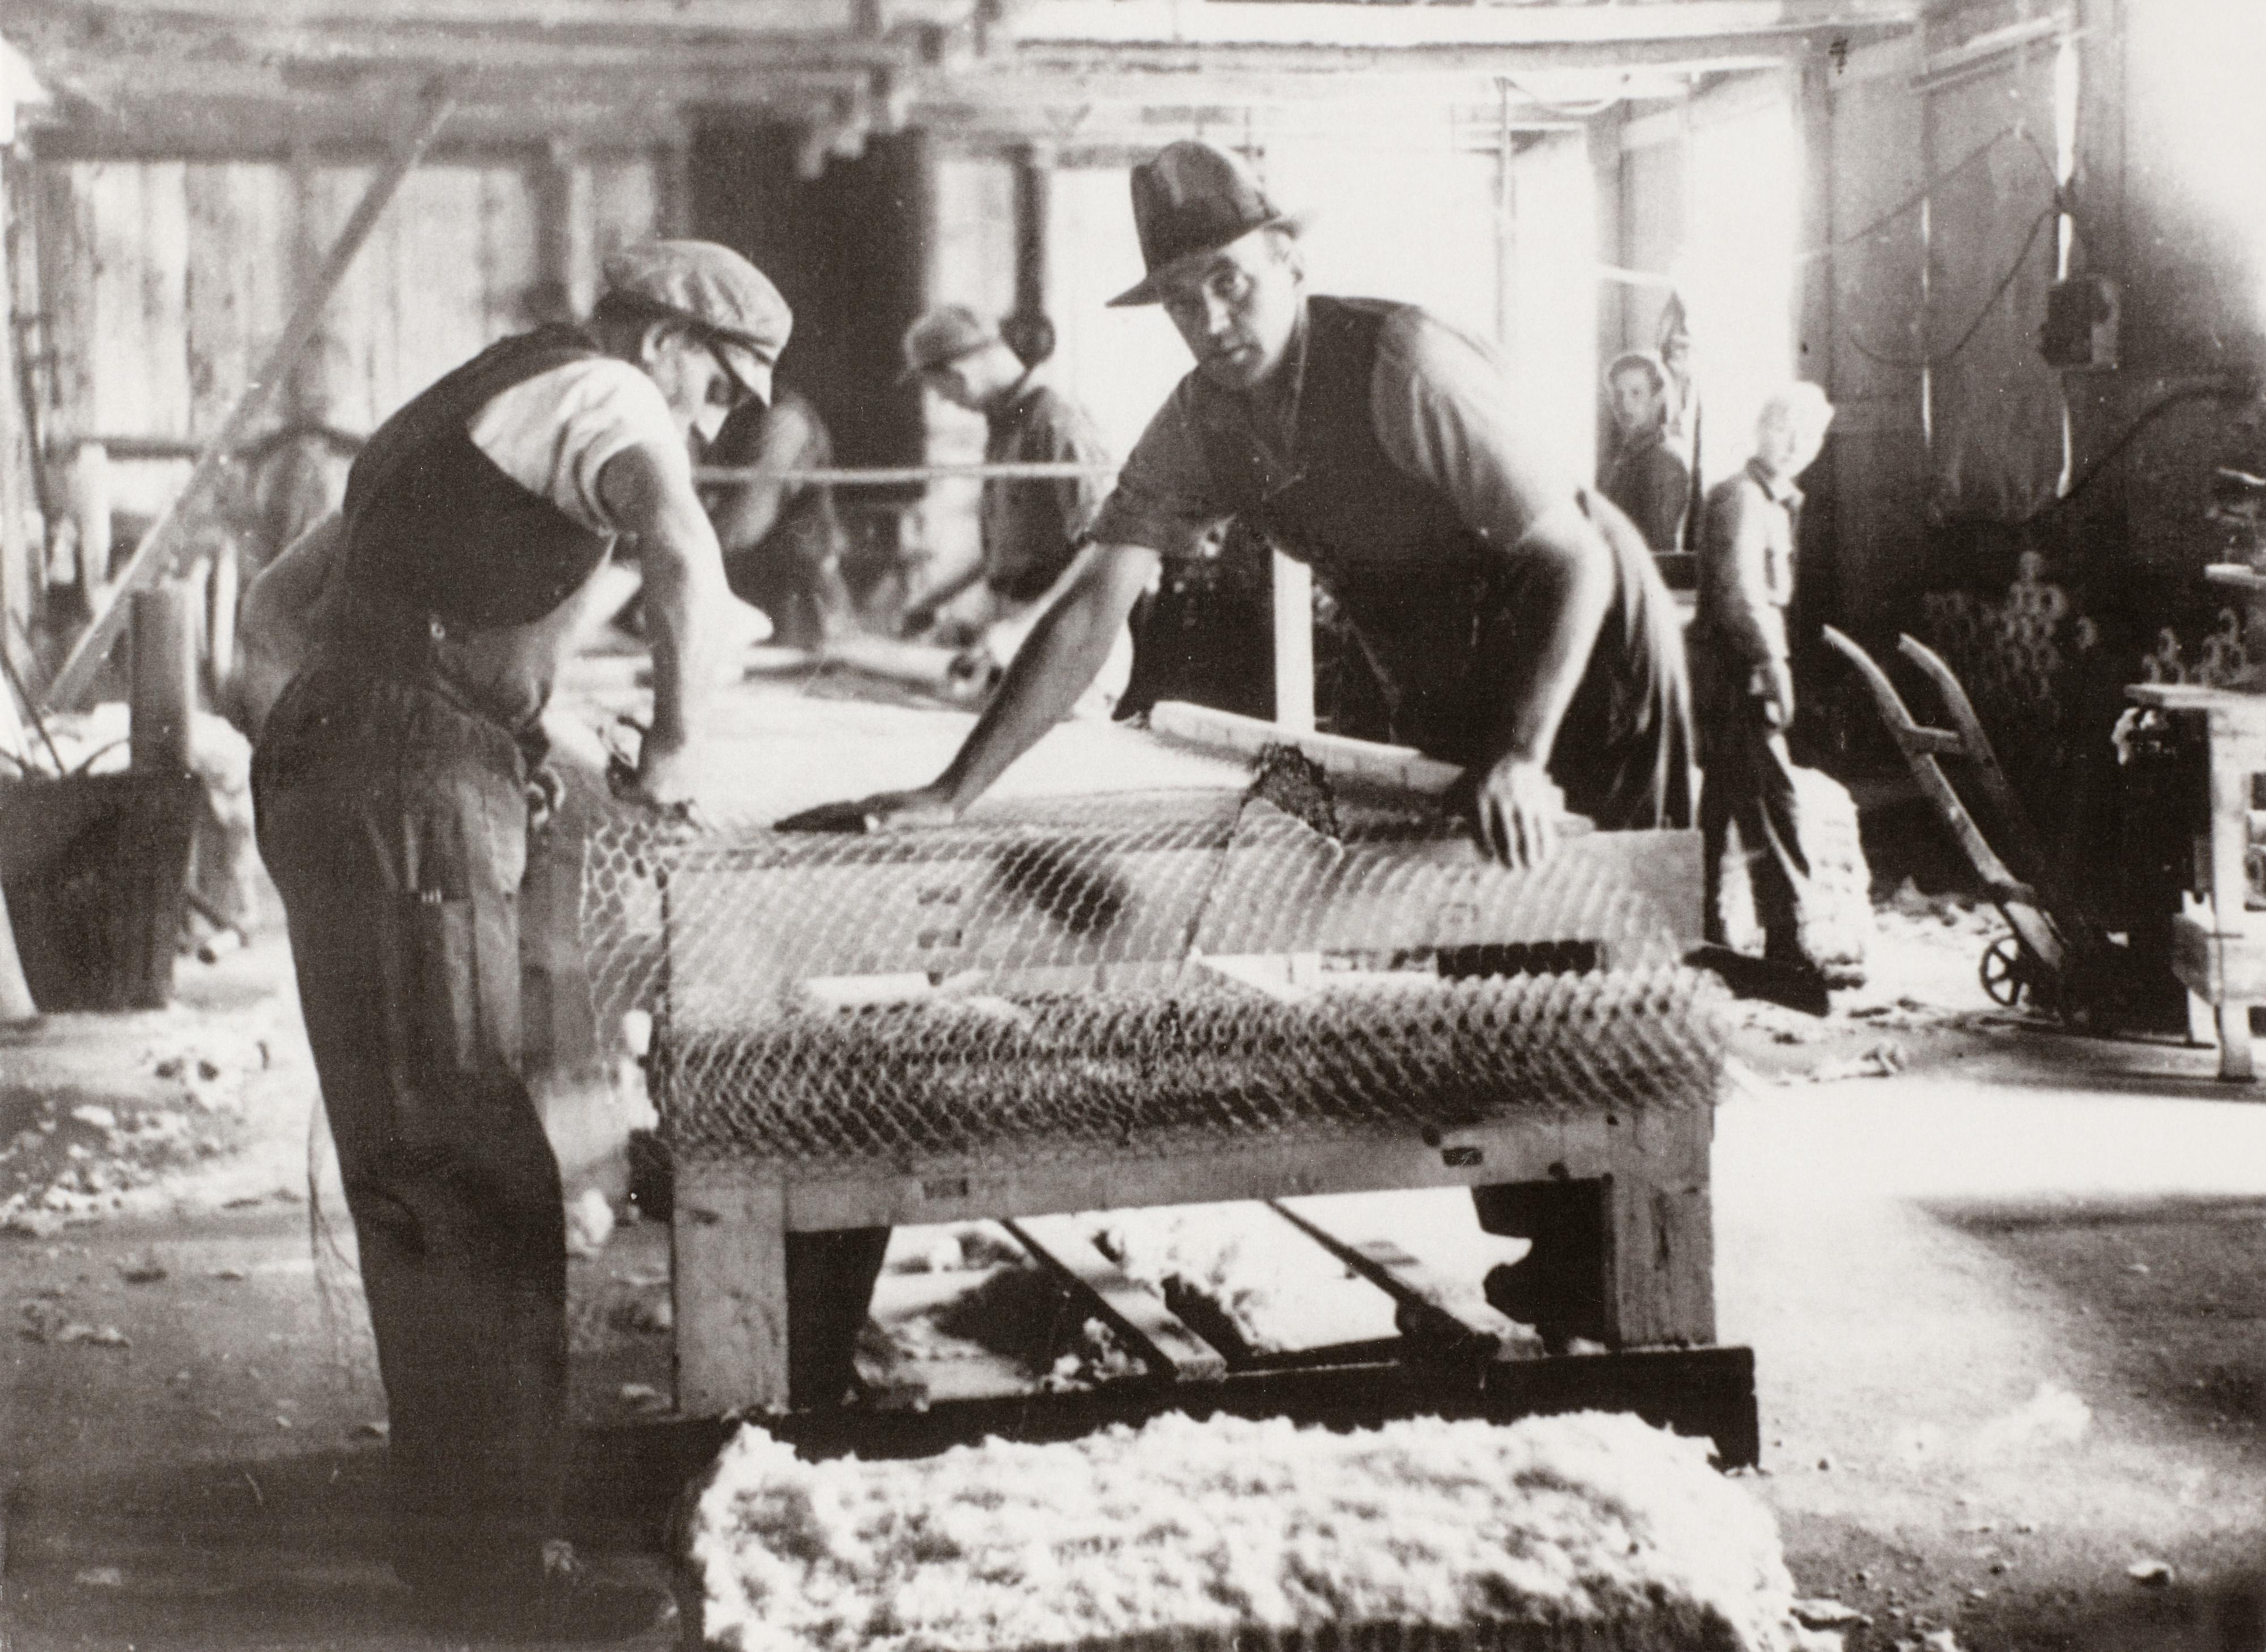 Production at the Factory in Hedehusene late 1930.